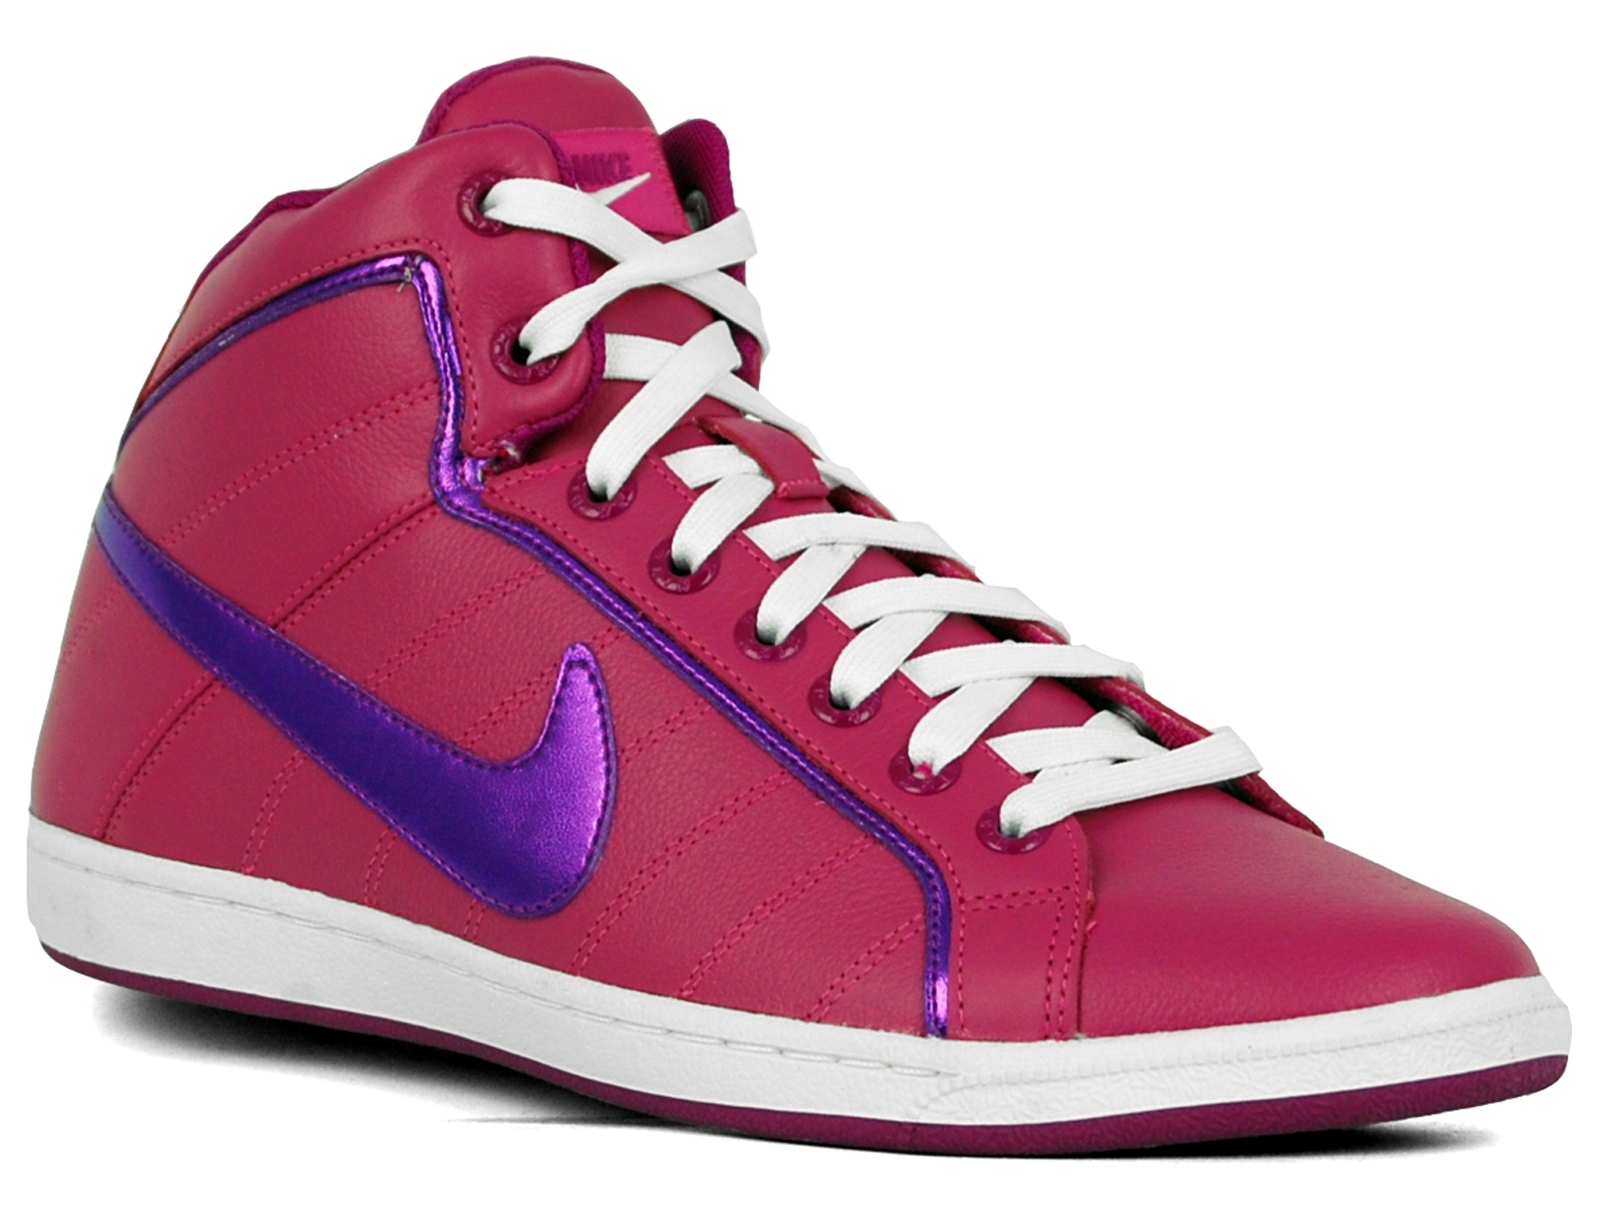 Avantisport - Nike - Womens Court Tradition Leather Mid - New Magenta/red Plum/white